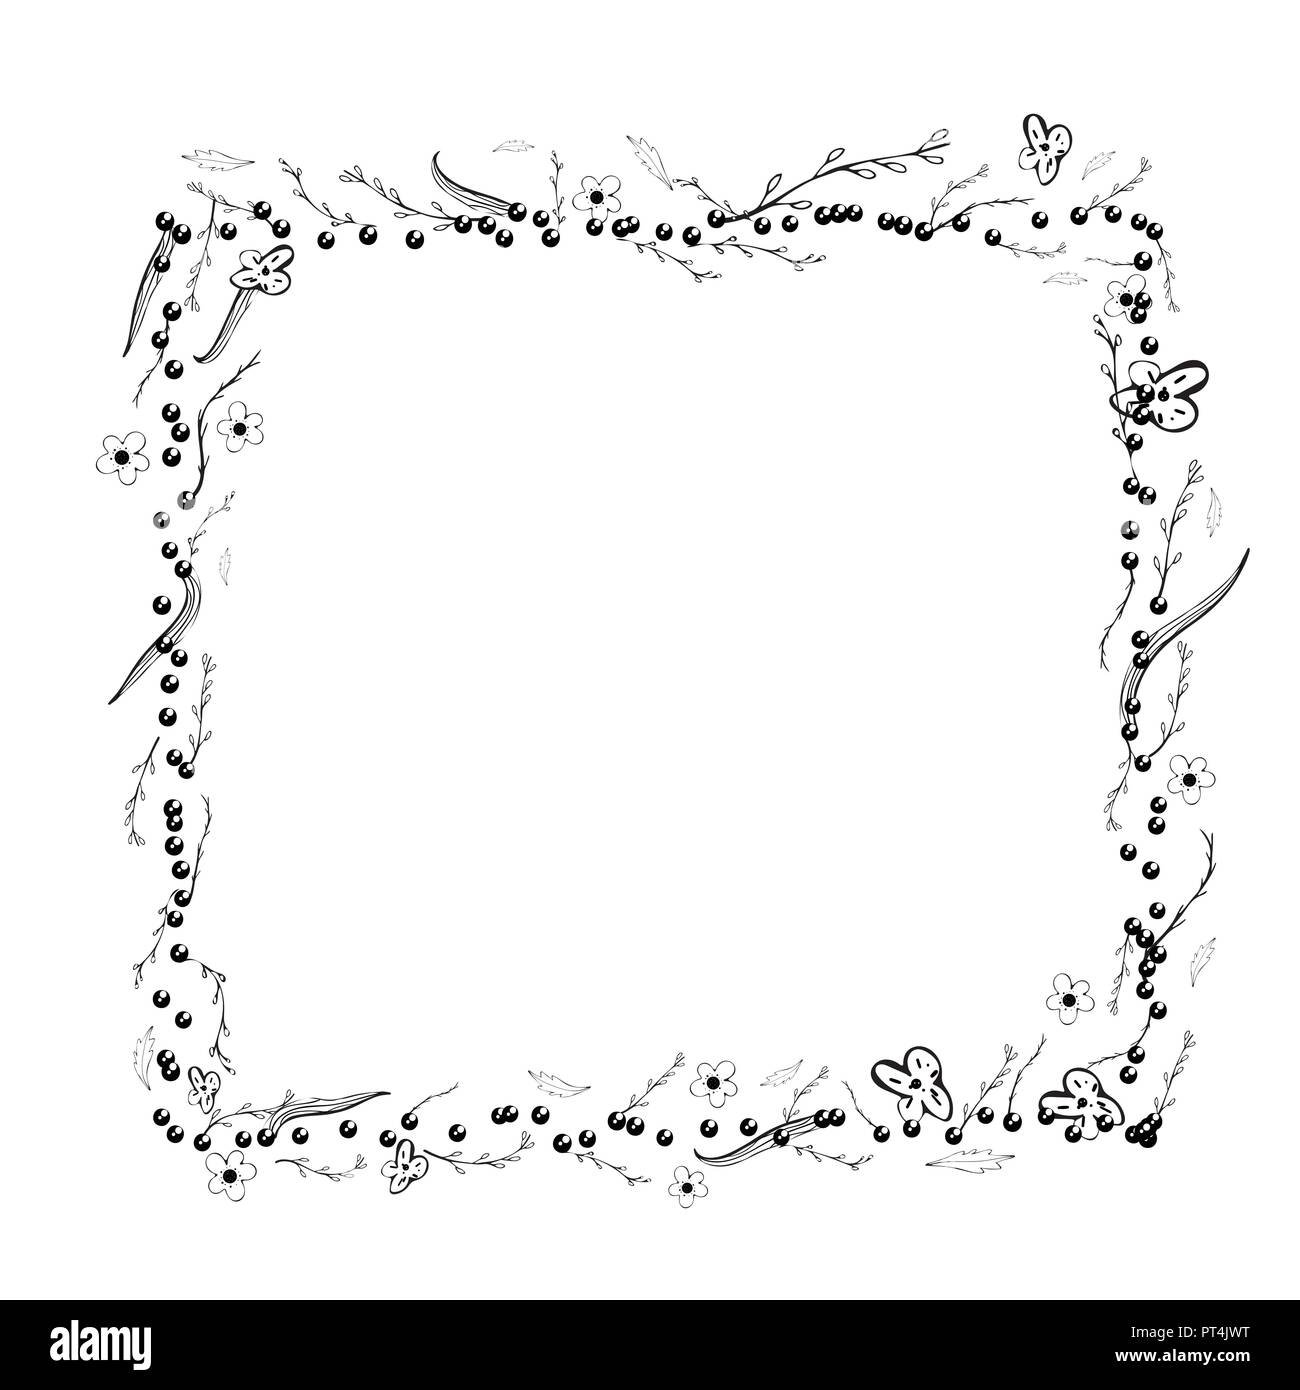 Download Field flowers and leaves square frame. Hand drawn style ...